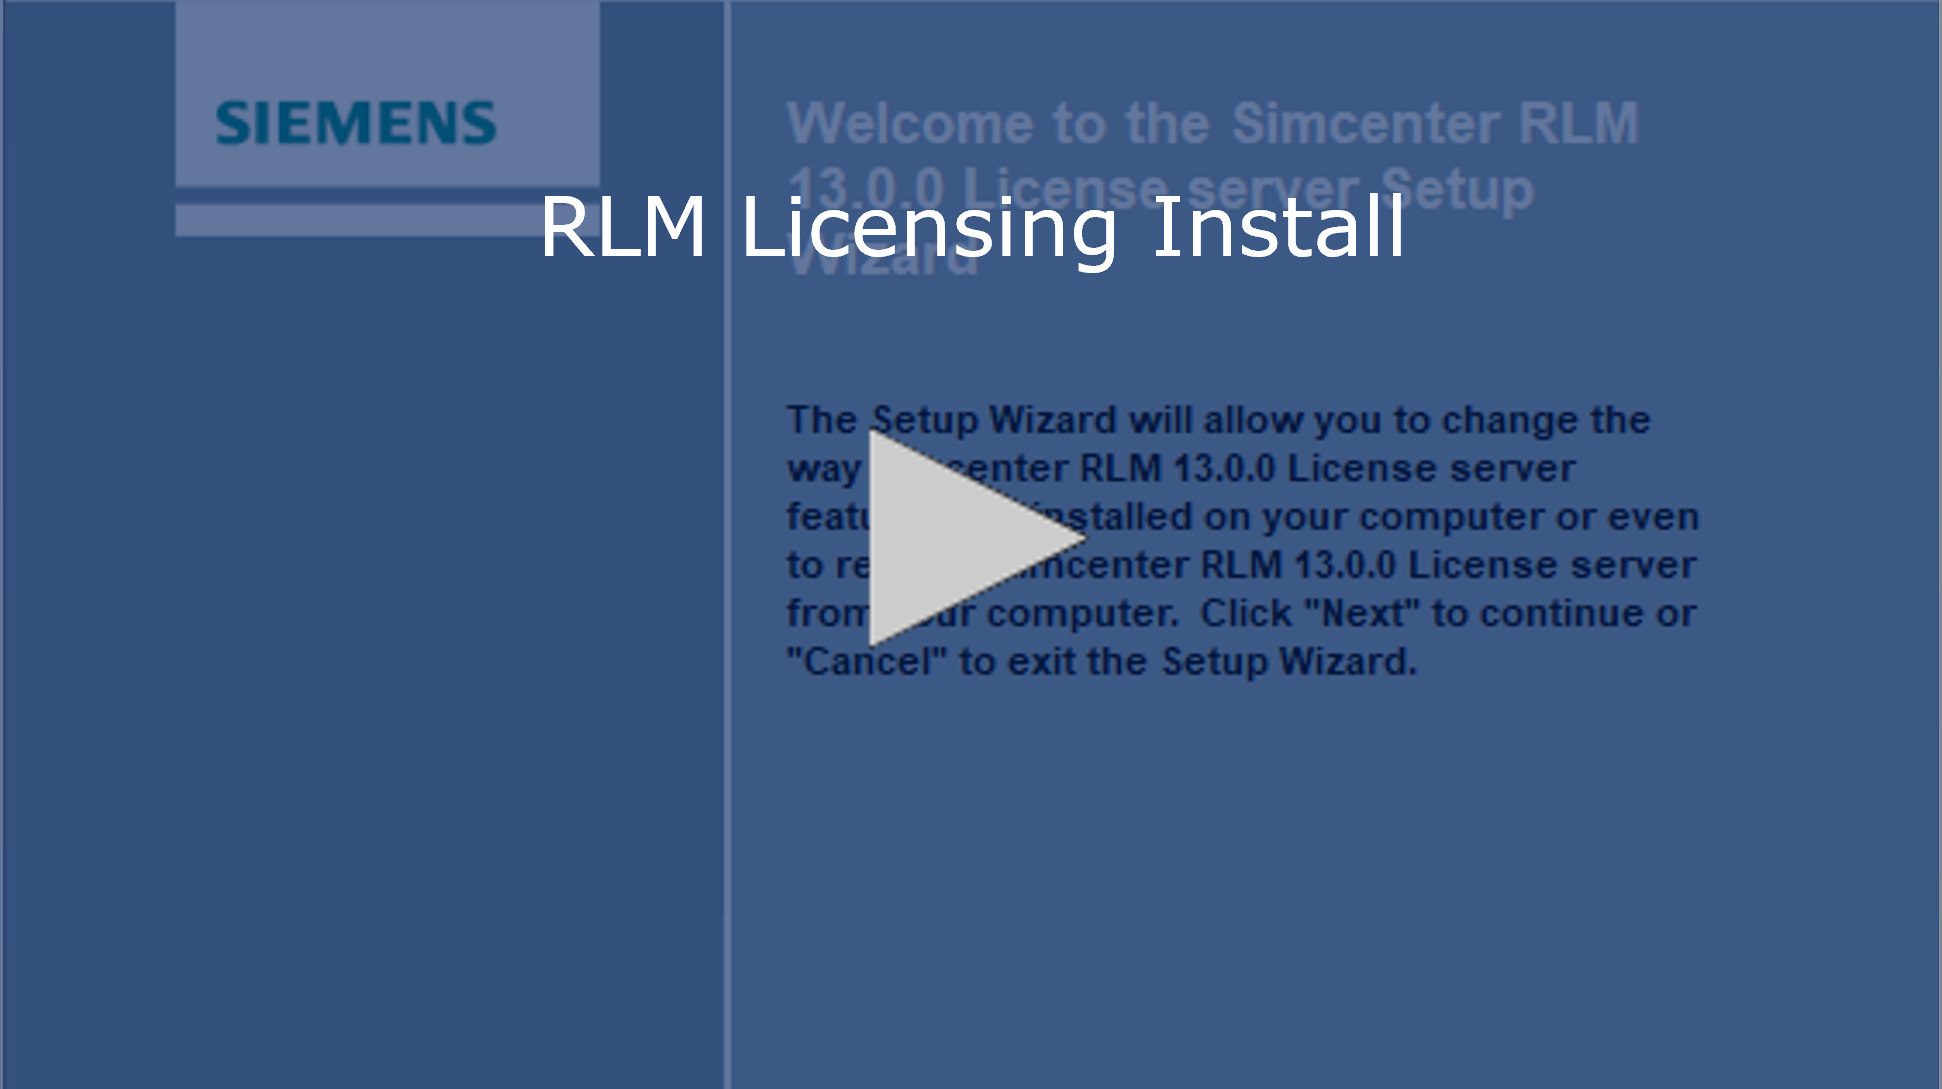 Image link to the video walkthrough of installing the RLM13.0.0 License Server.